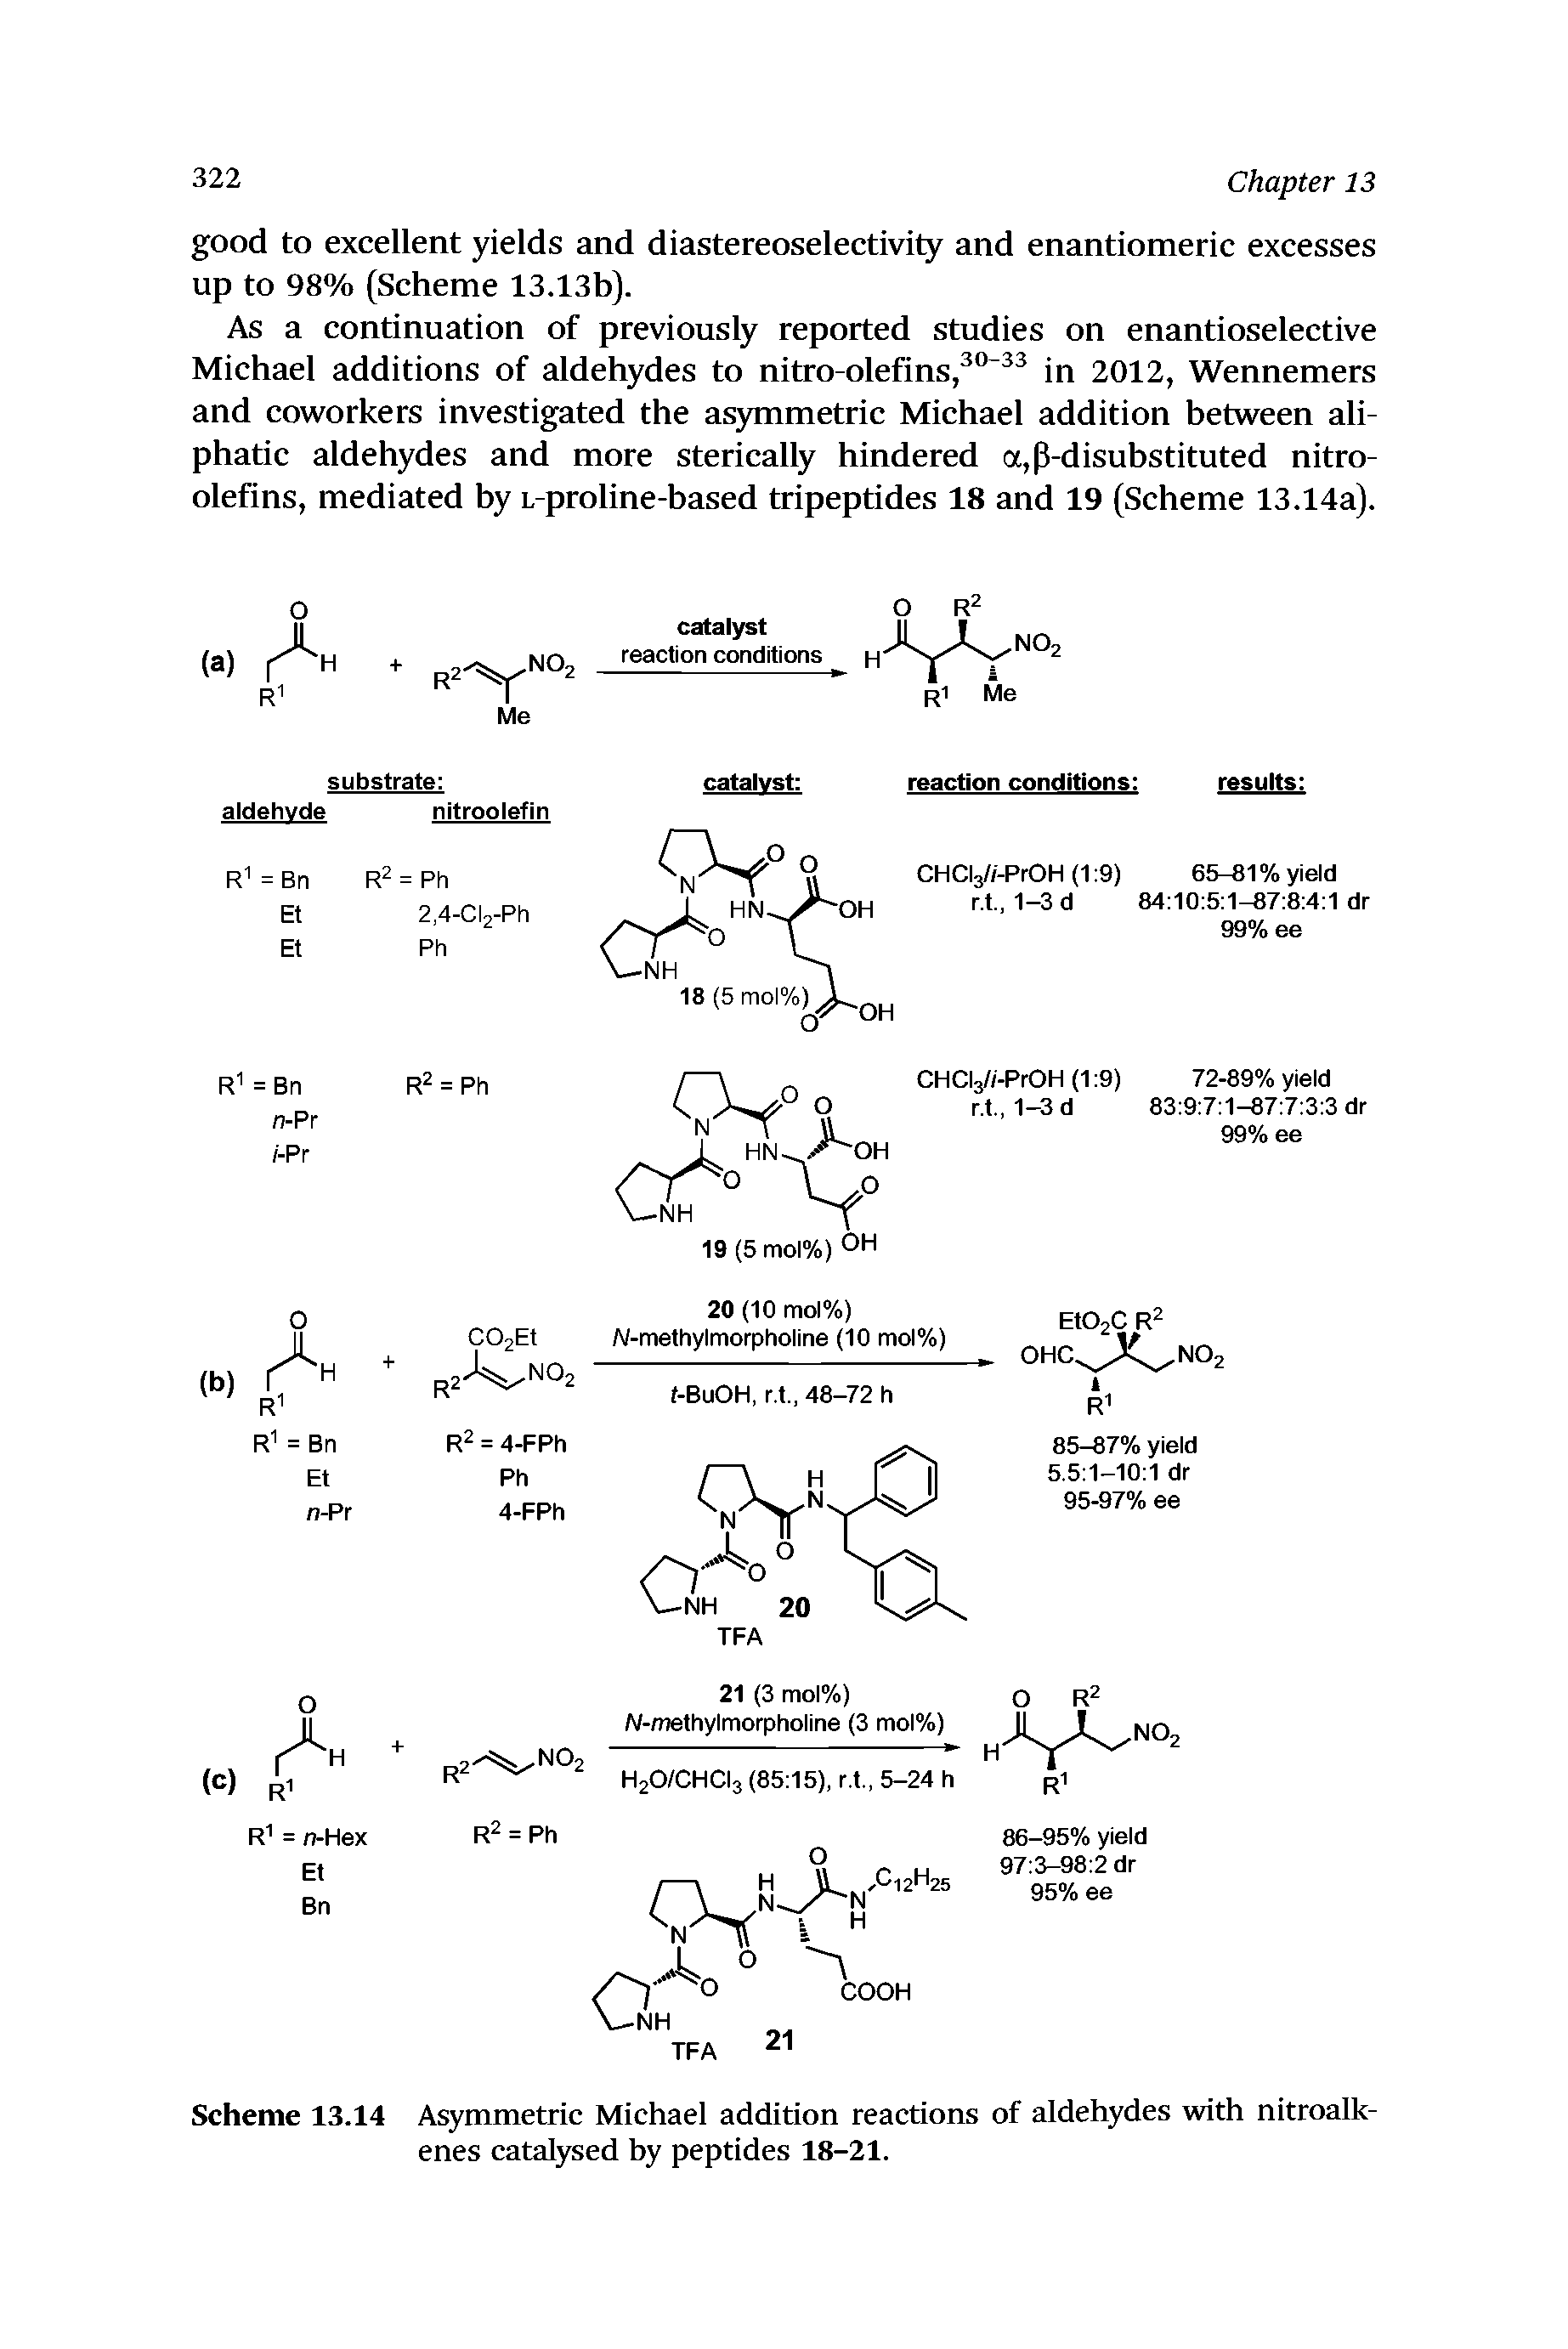 Scheme 13.14 Asymmetric Michael addition reactions of aldehydes with nitroalk-enes catalysed by peptides 18-21.